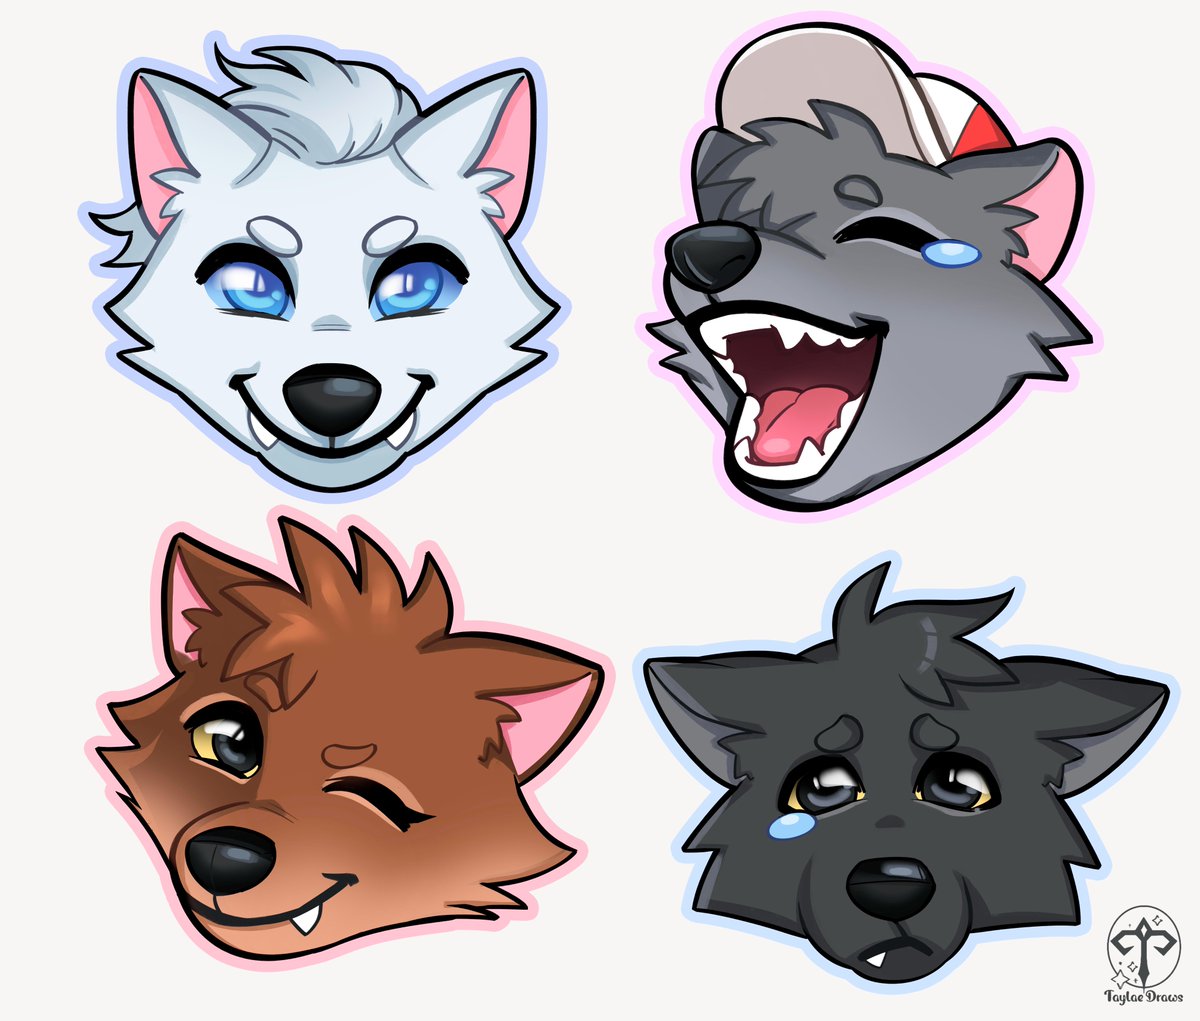 Another batch of emoji commissions, these came out so cute 🐺😈😂😉😢

commission me: tainah.larissaferreira@gmail.com
 #illustration #wolffufrry #furry #furryart #artistsoninstagram #chibistyle #chibi #emoji